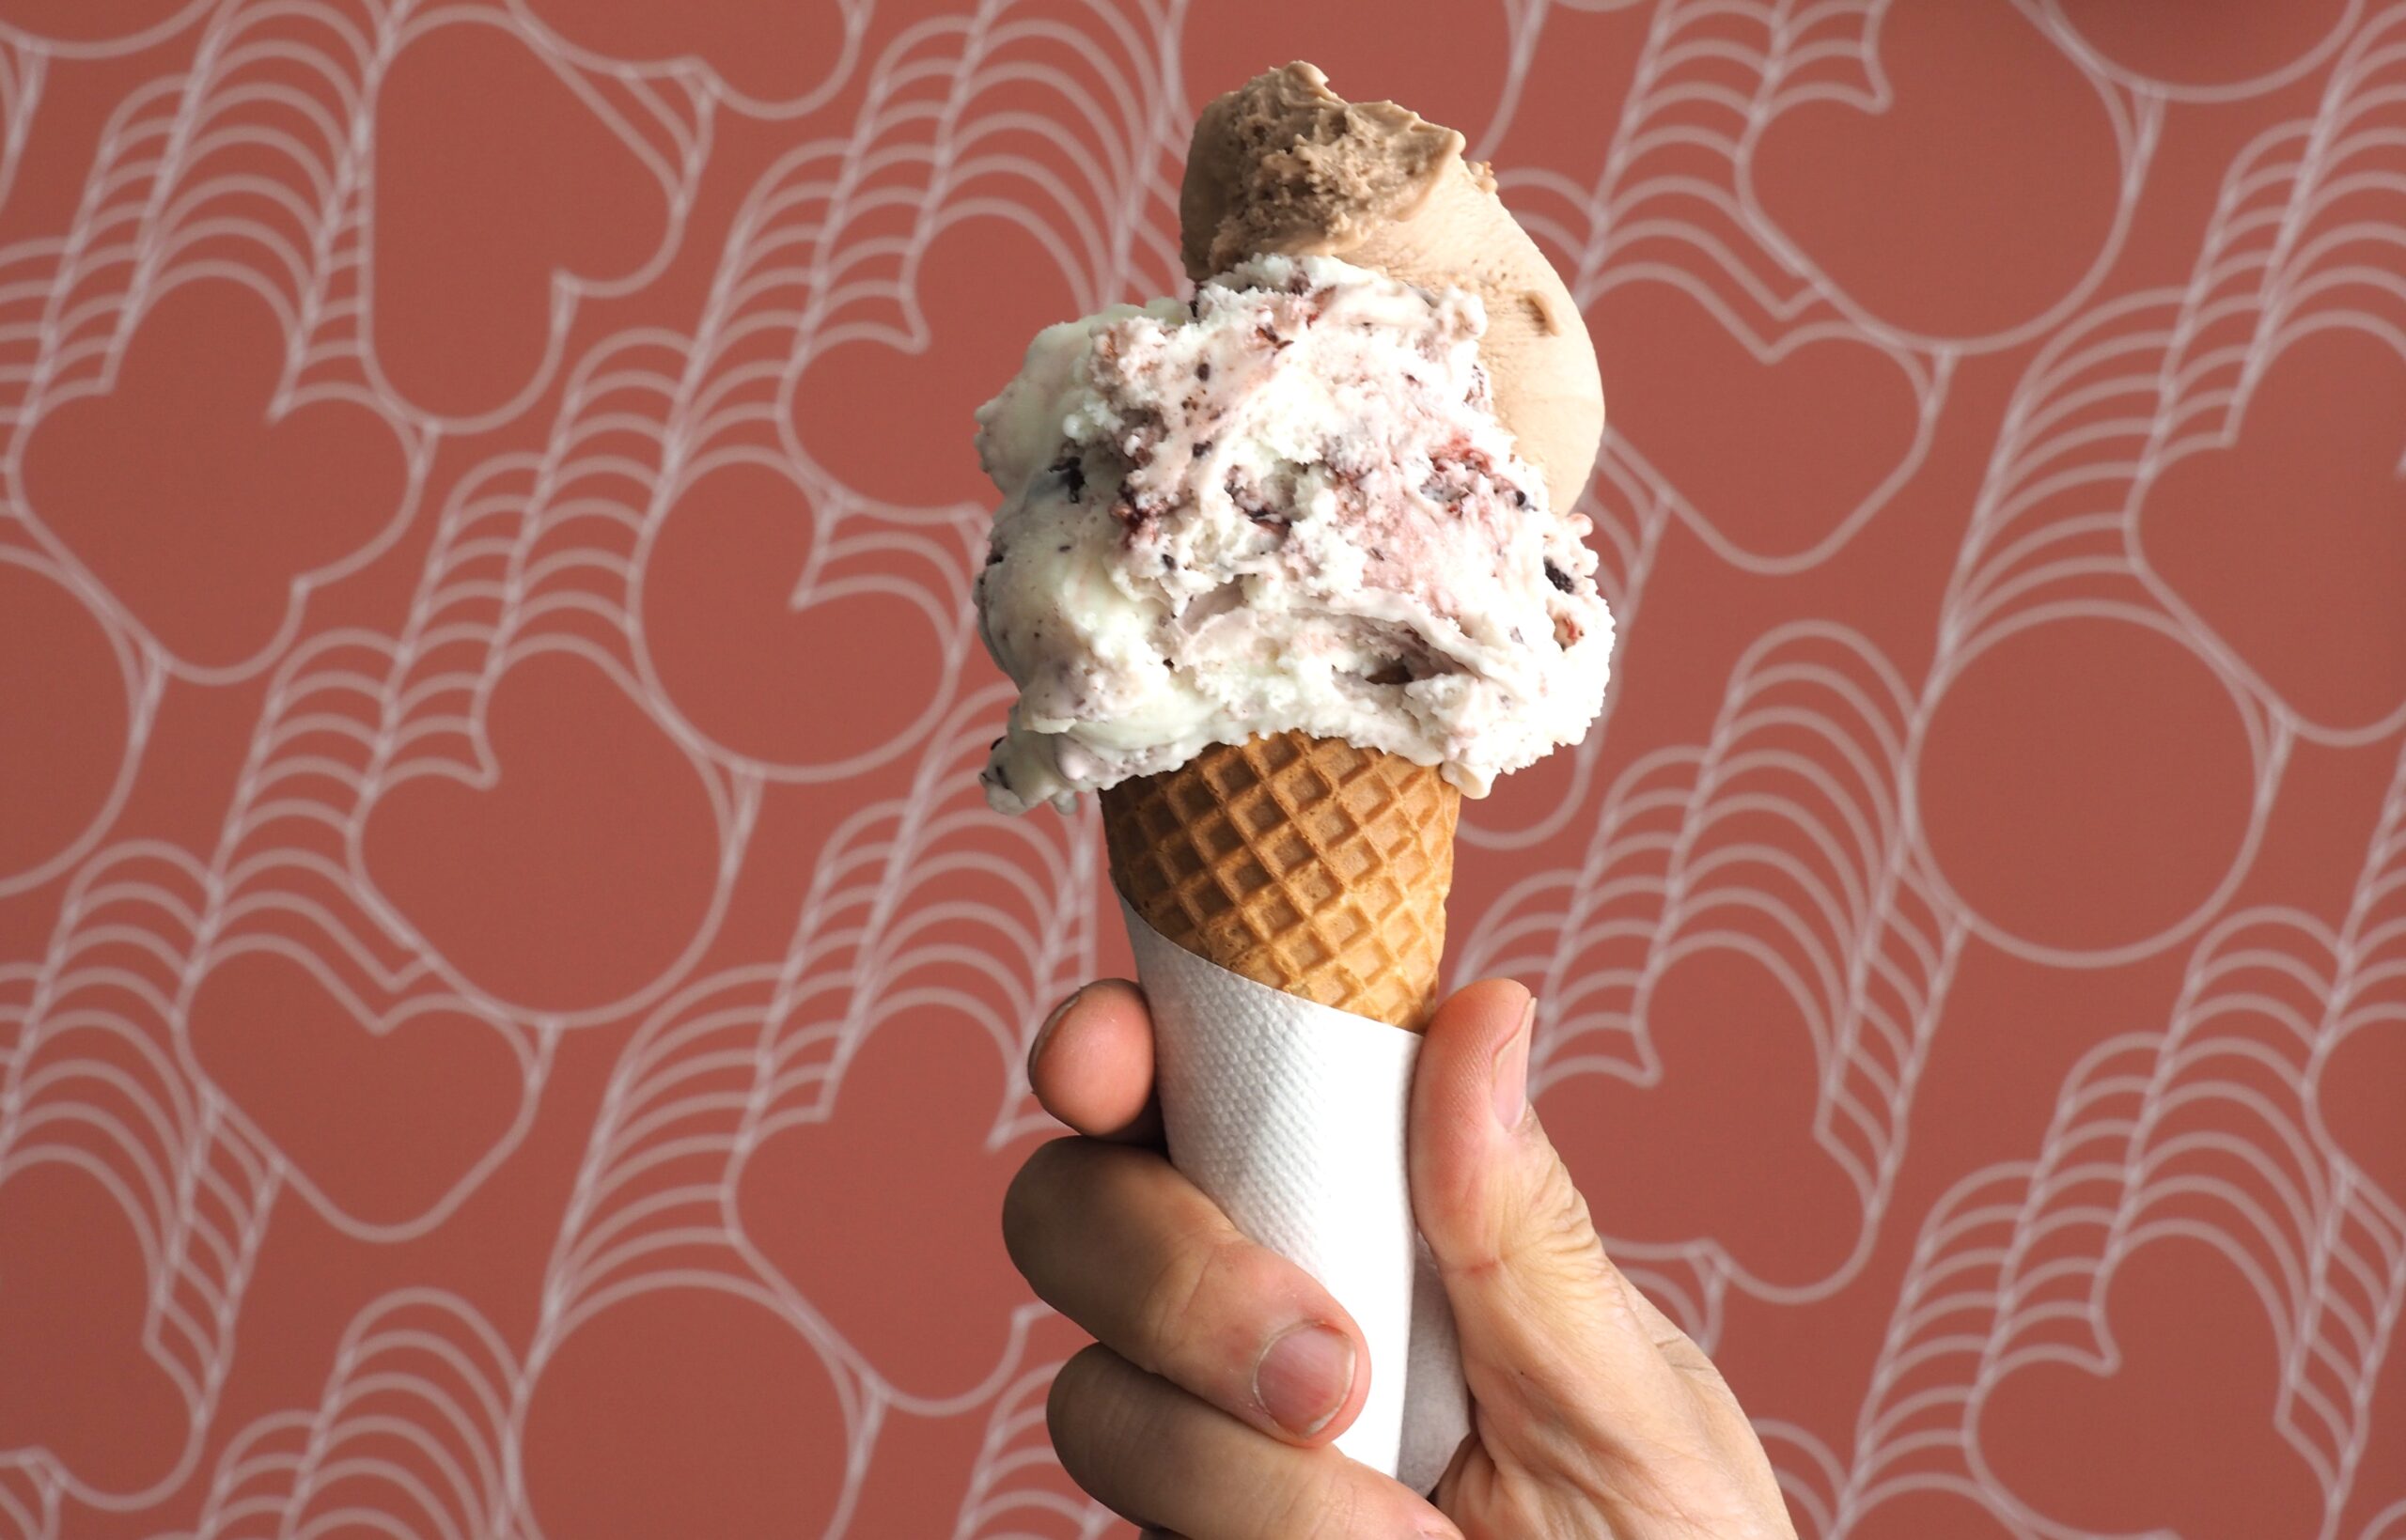 A star flavour from Okay Lucy: luscious cherry ripe gelato. Paired with Okay Lucy’s classic hazelnut gelato.